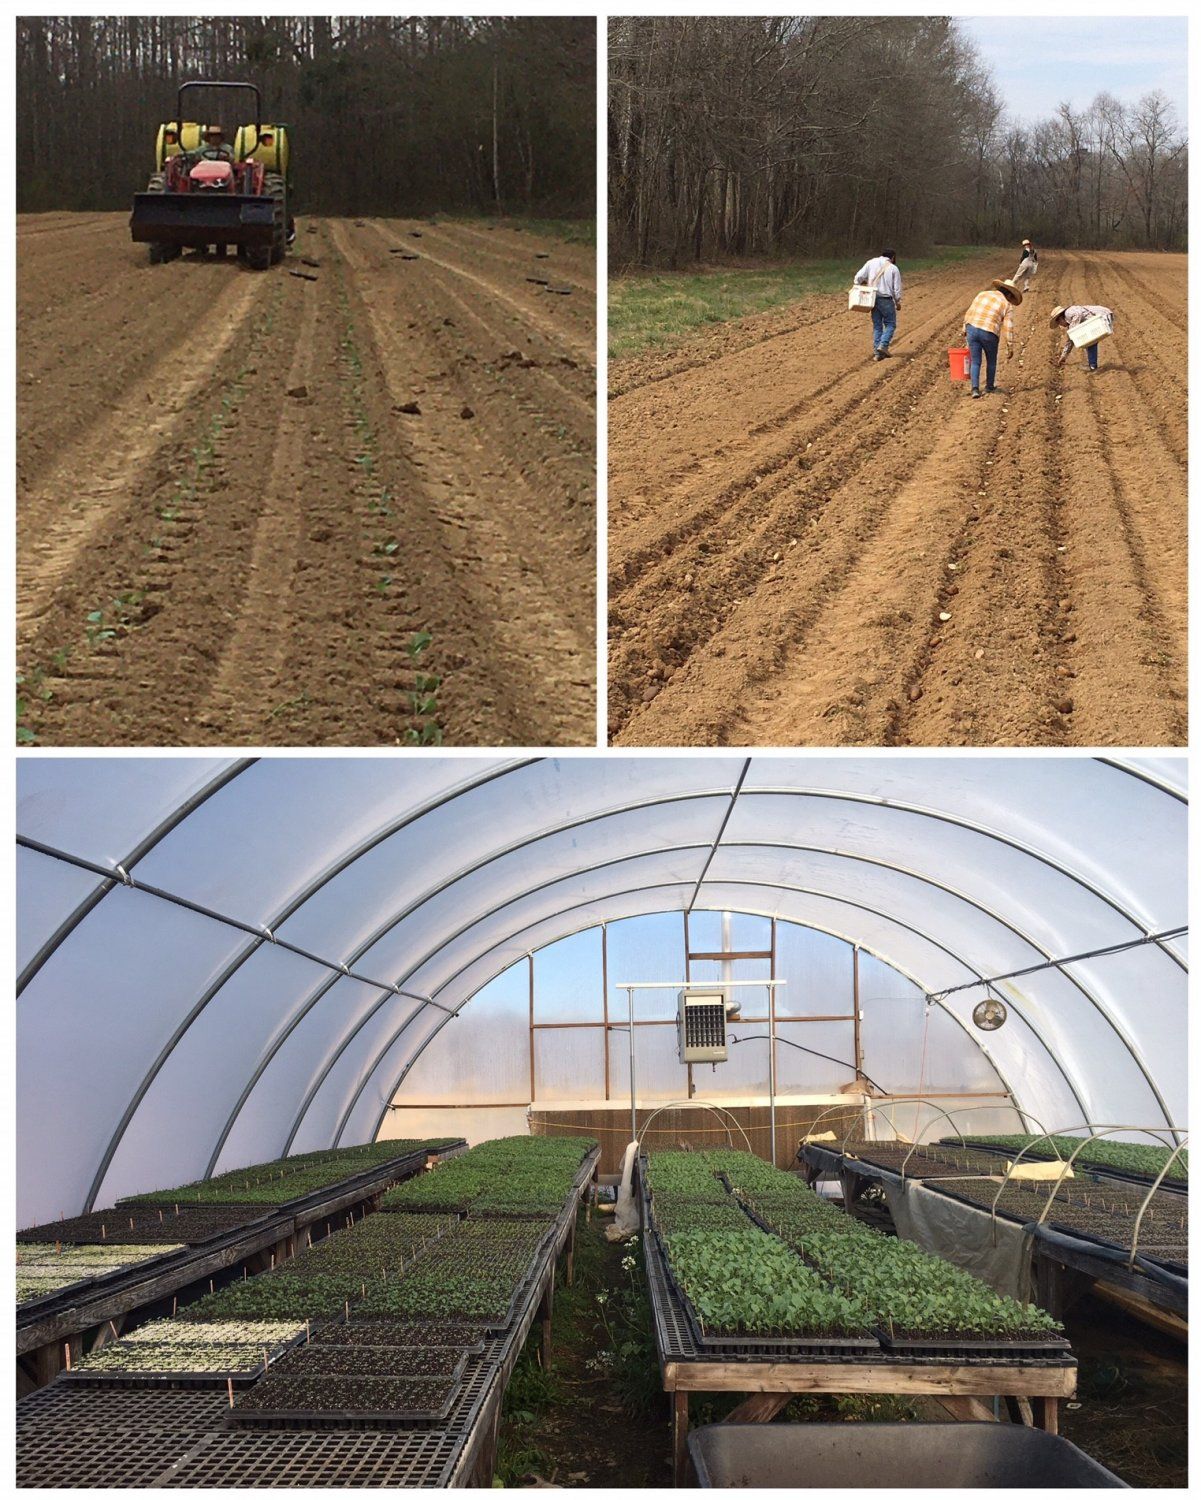 Previous Happening: Farm Happenings for March 18, 2021